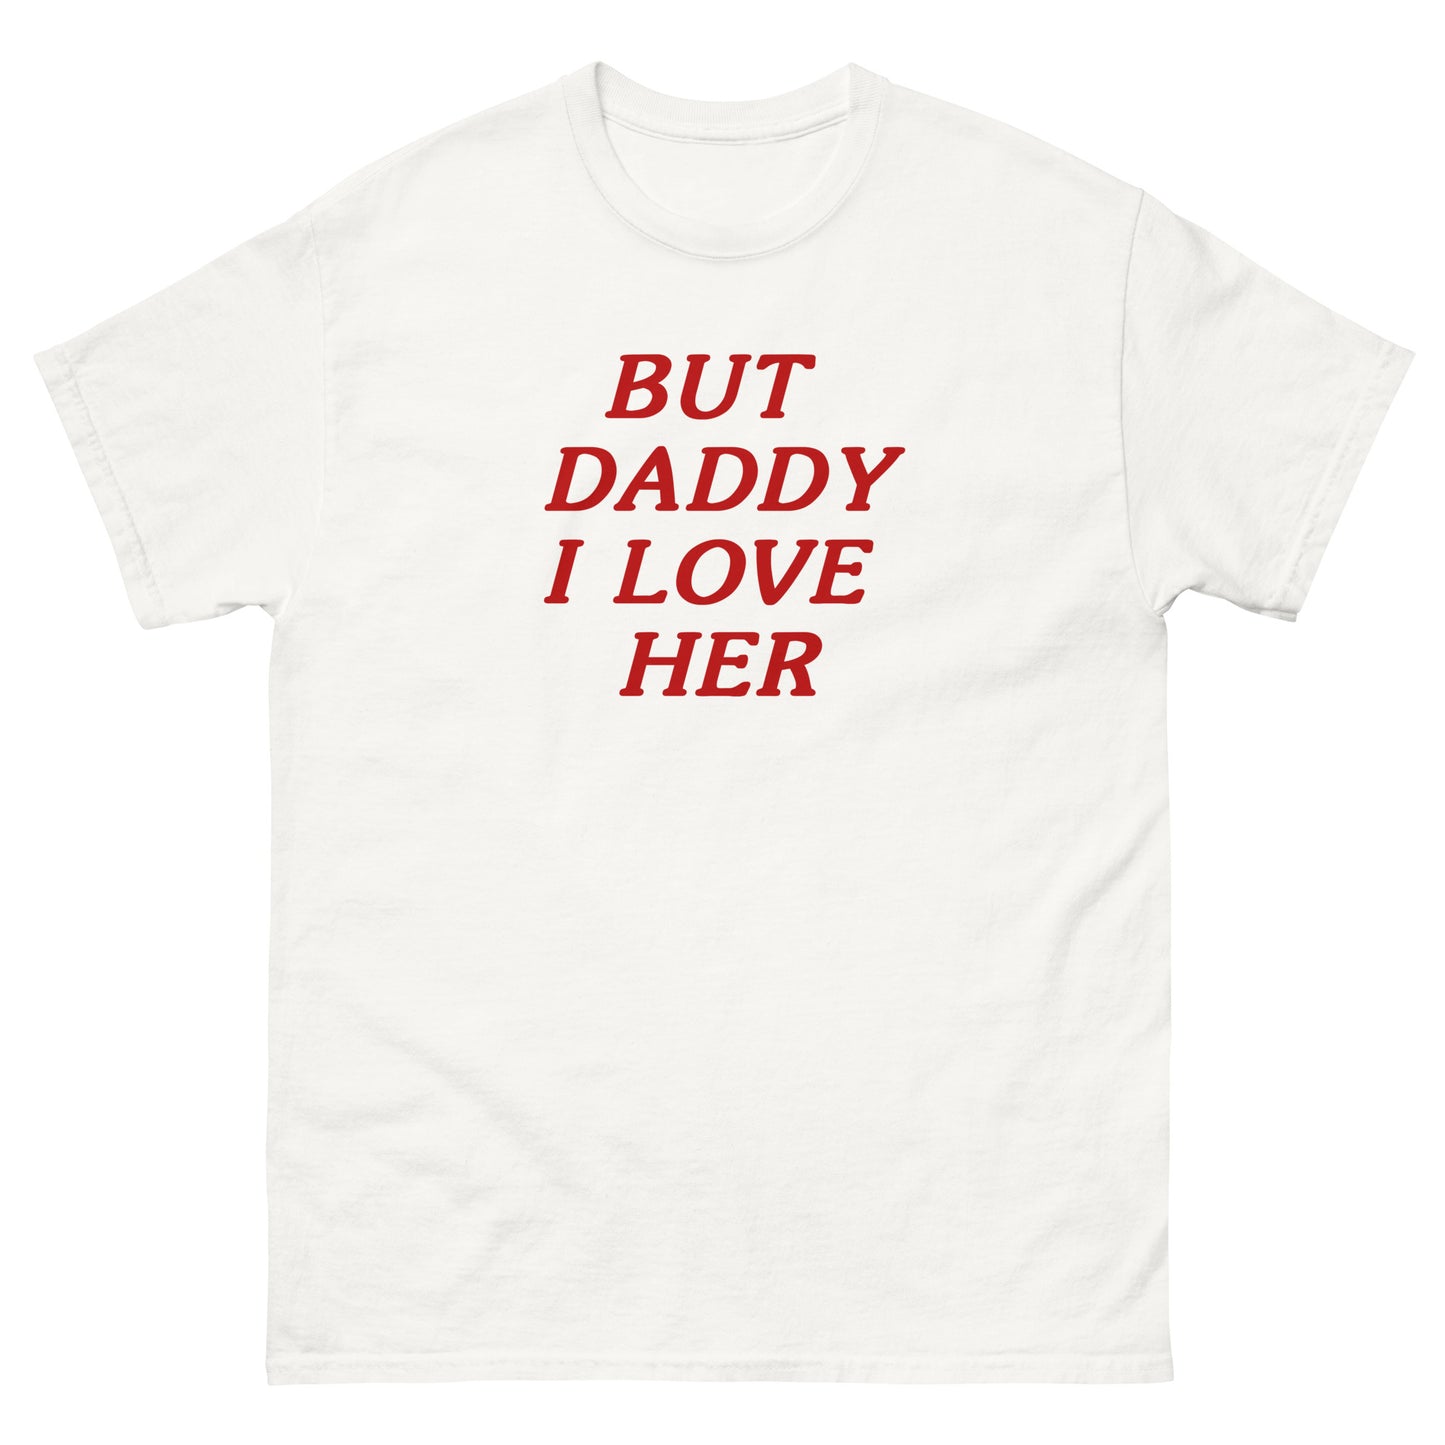 "but daddy i love her" shirt